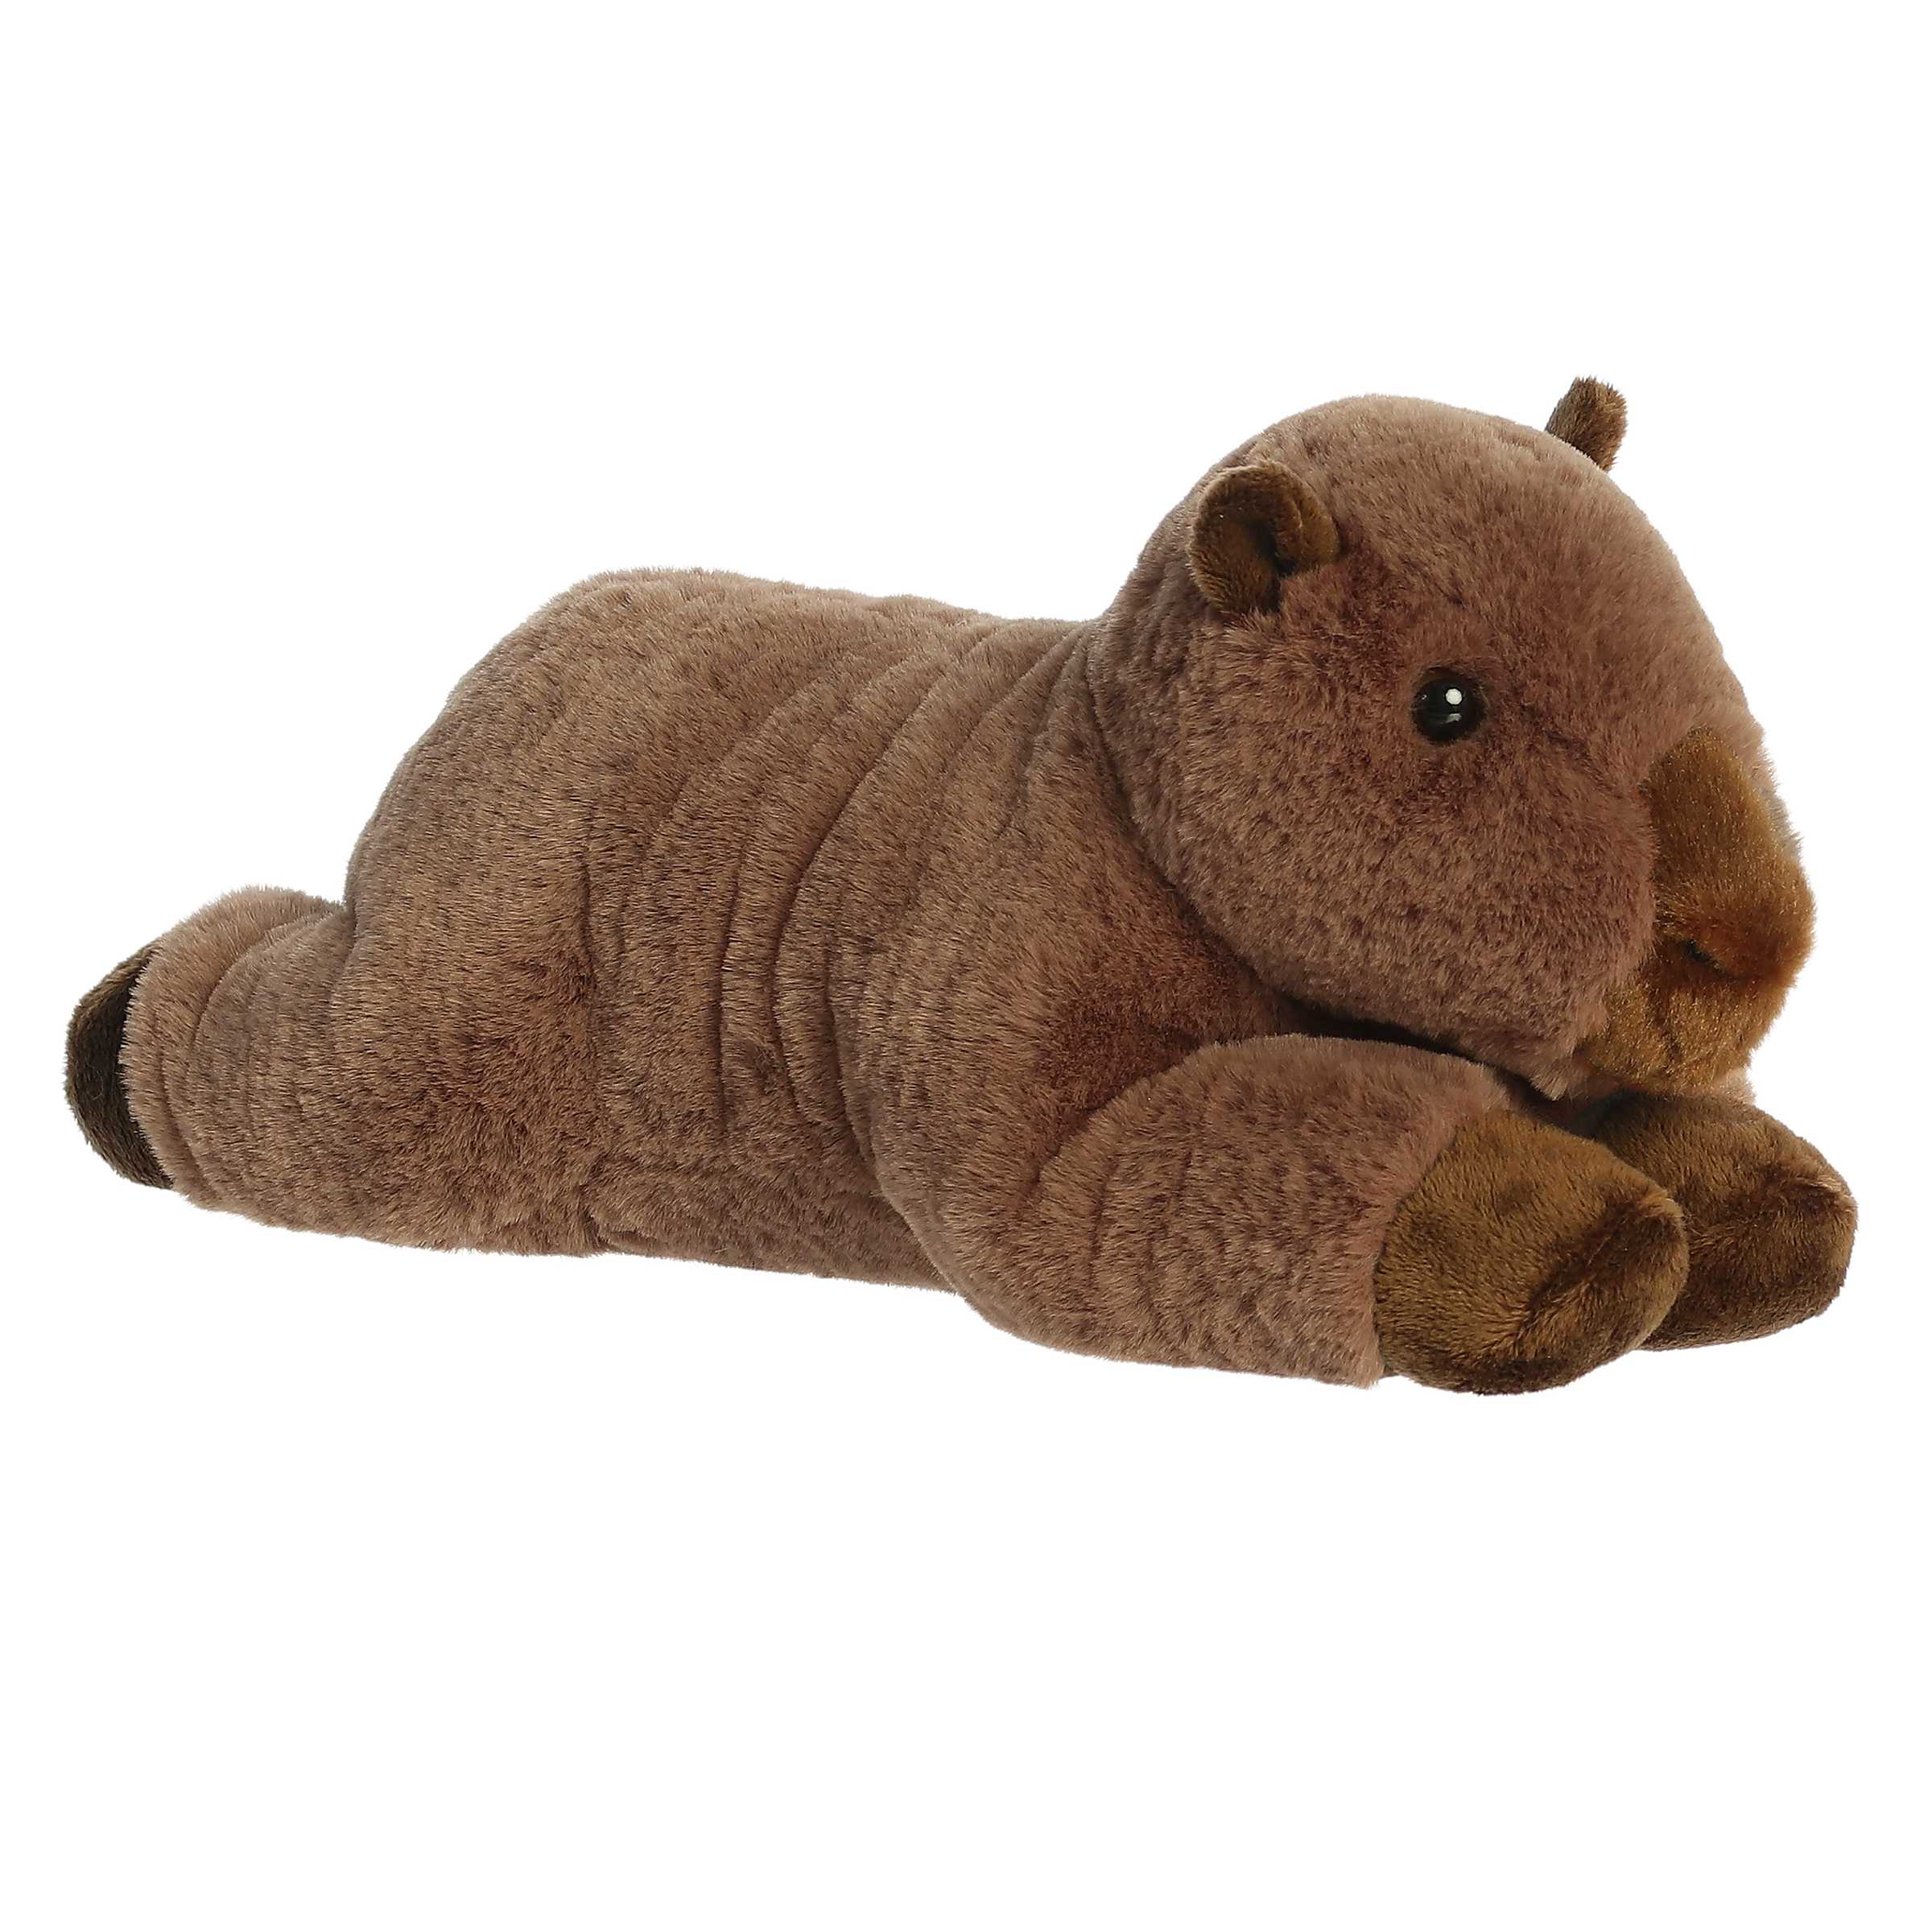 Lifelike Flopsie Capybara plush with soft texture, a unique addition promising warmth and joy.